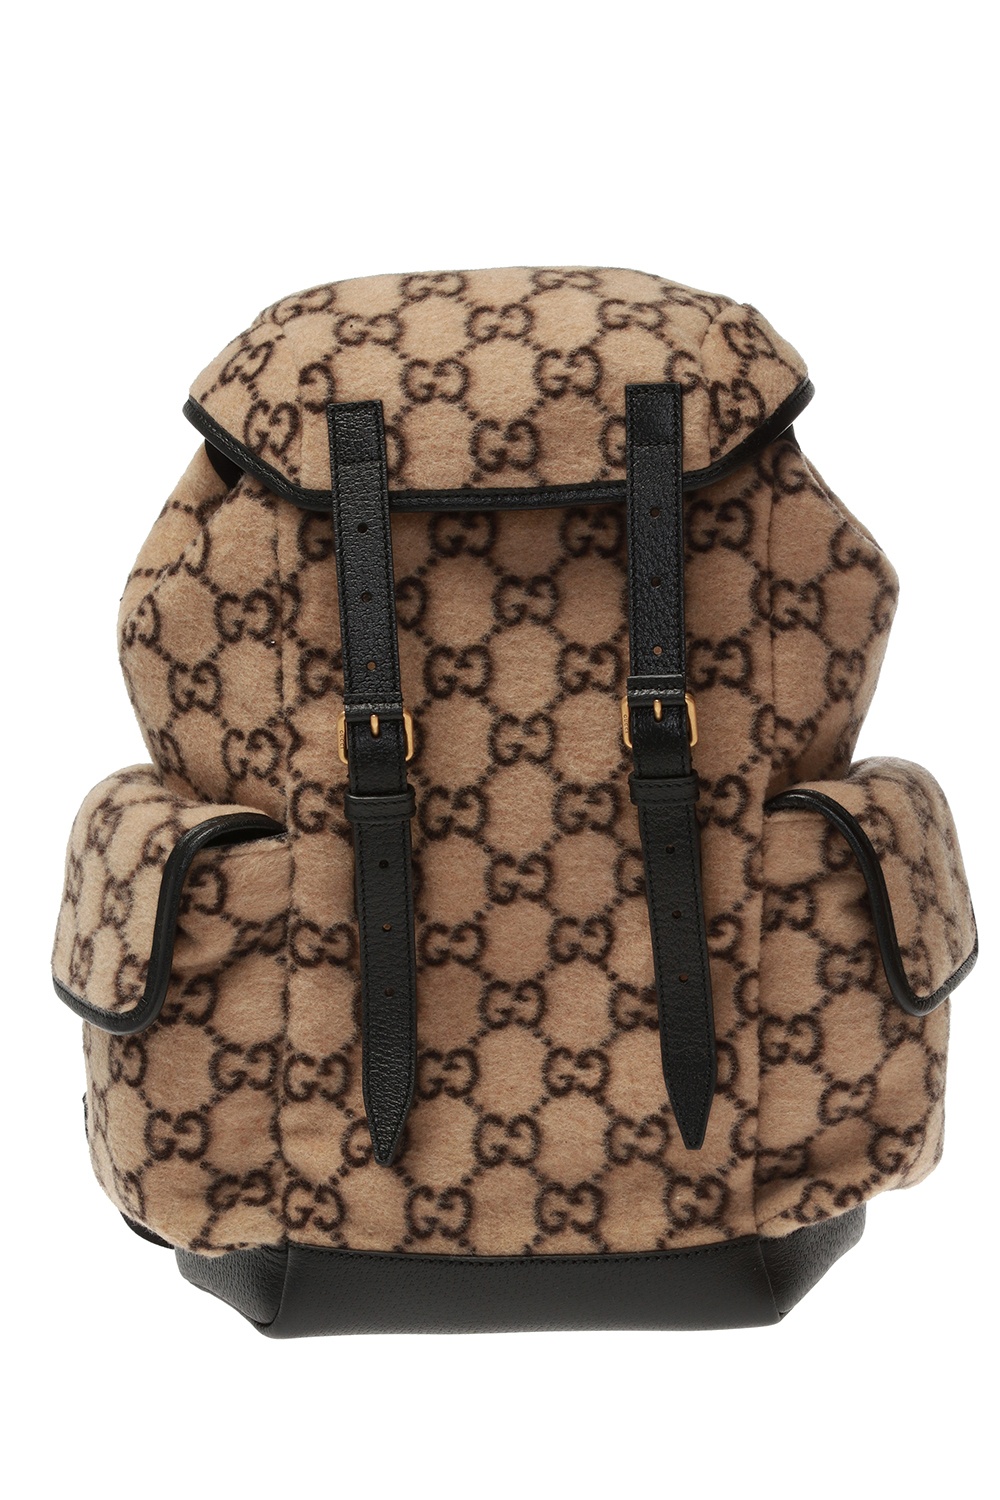 Gucci Wool Backpack - Couture USA